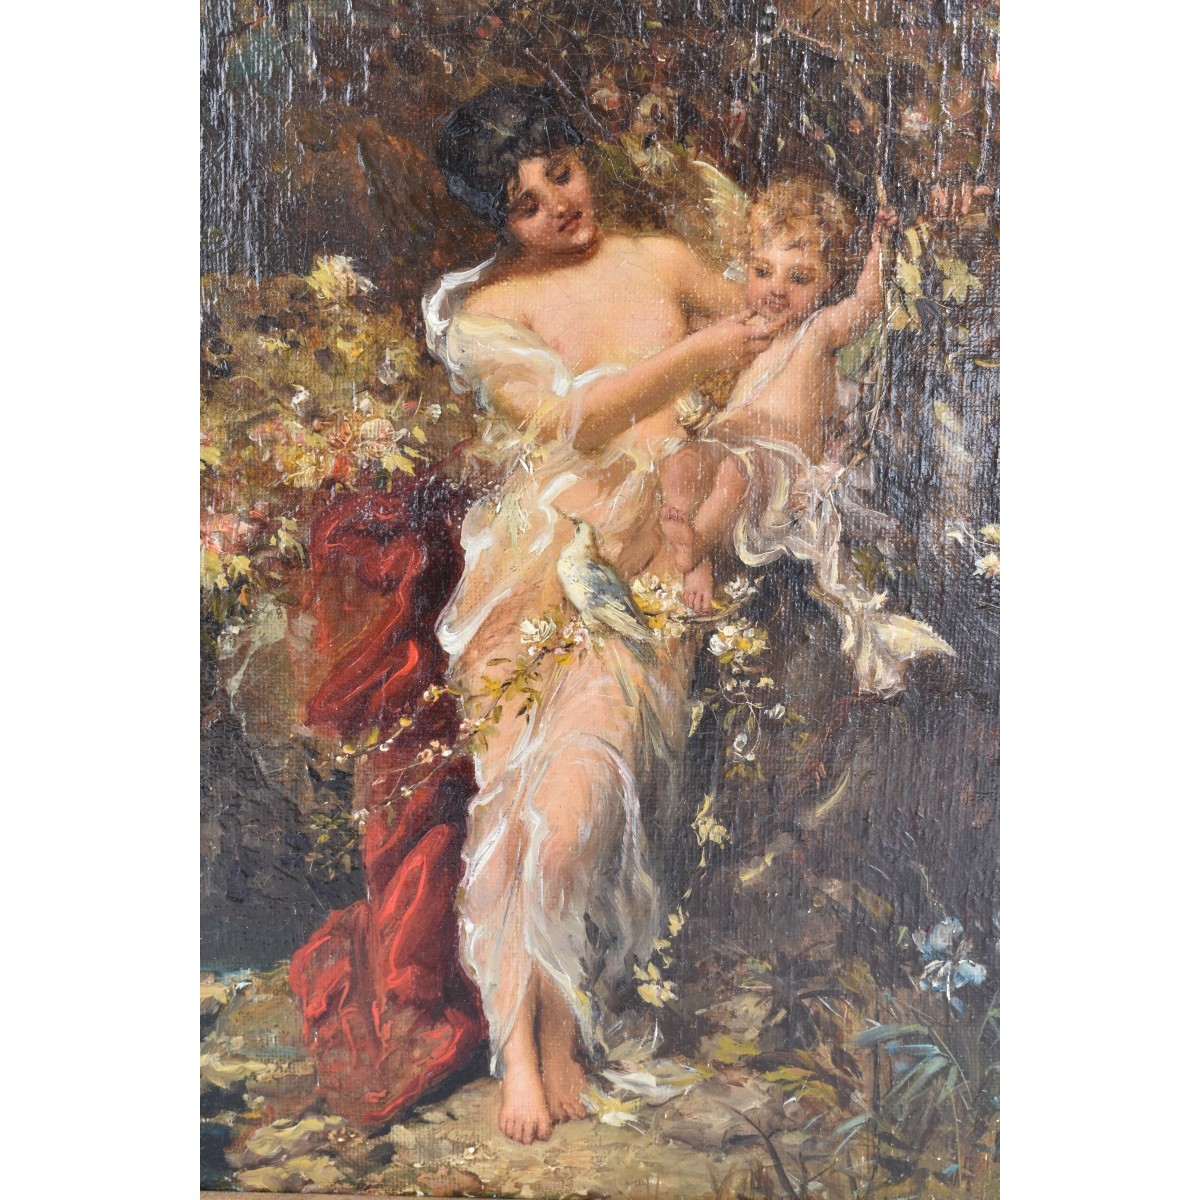 19/20th Century Oil on Canvas "Psyche"